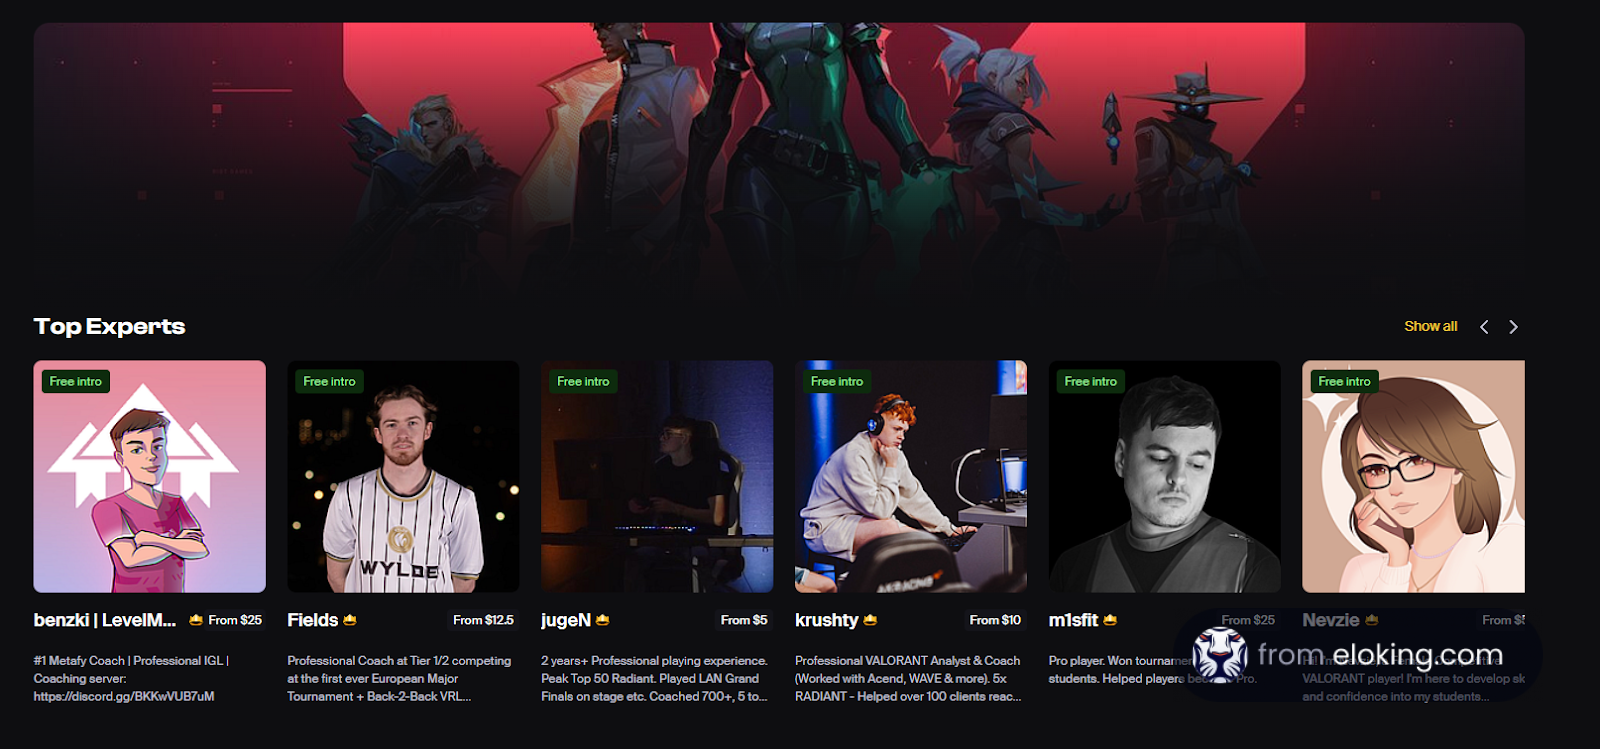 A selection of esports coaches and experts displayed on a coaching platform